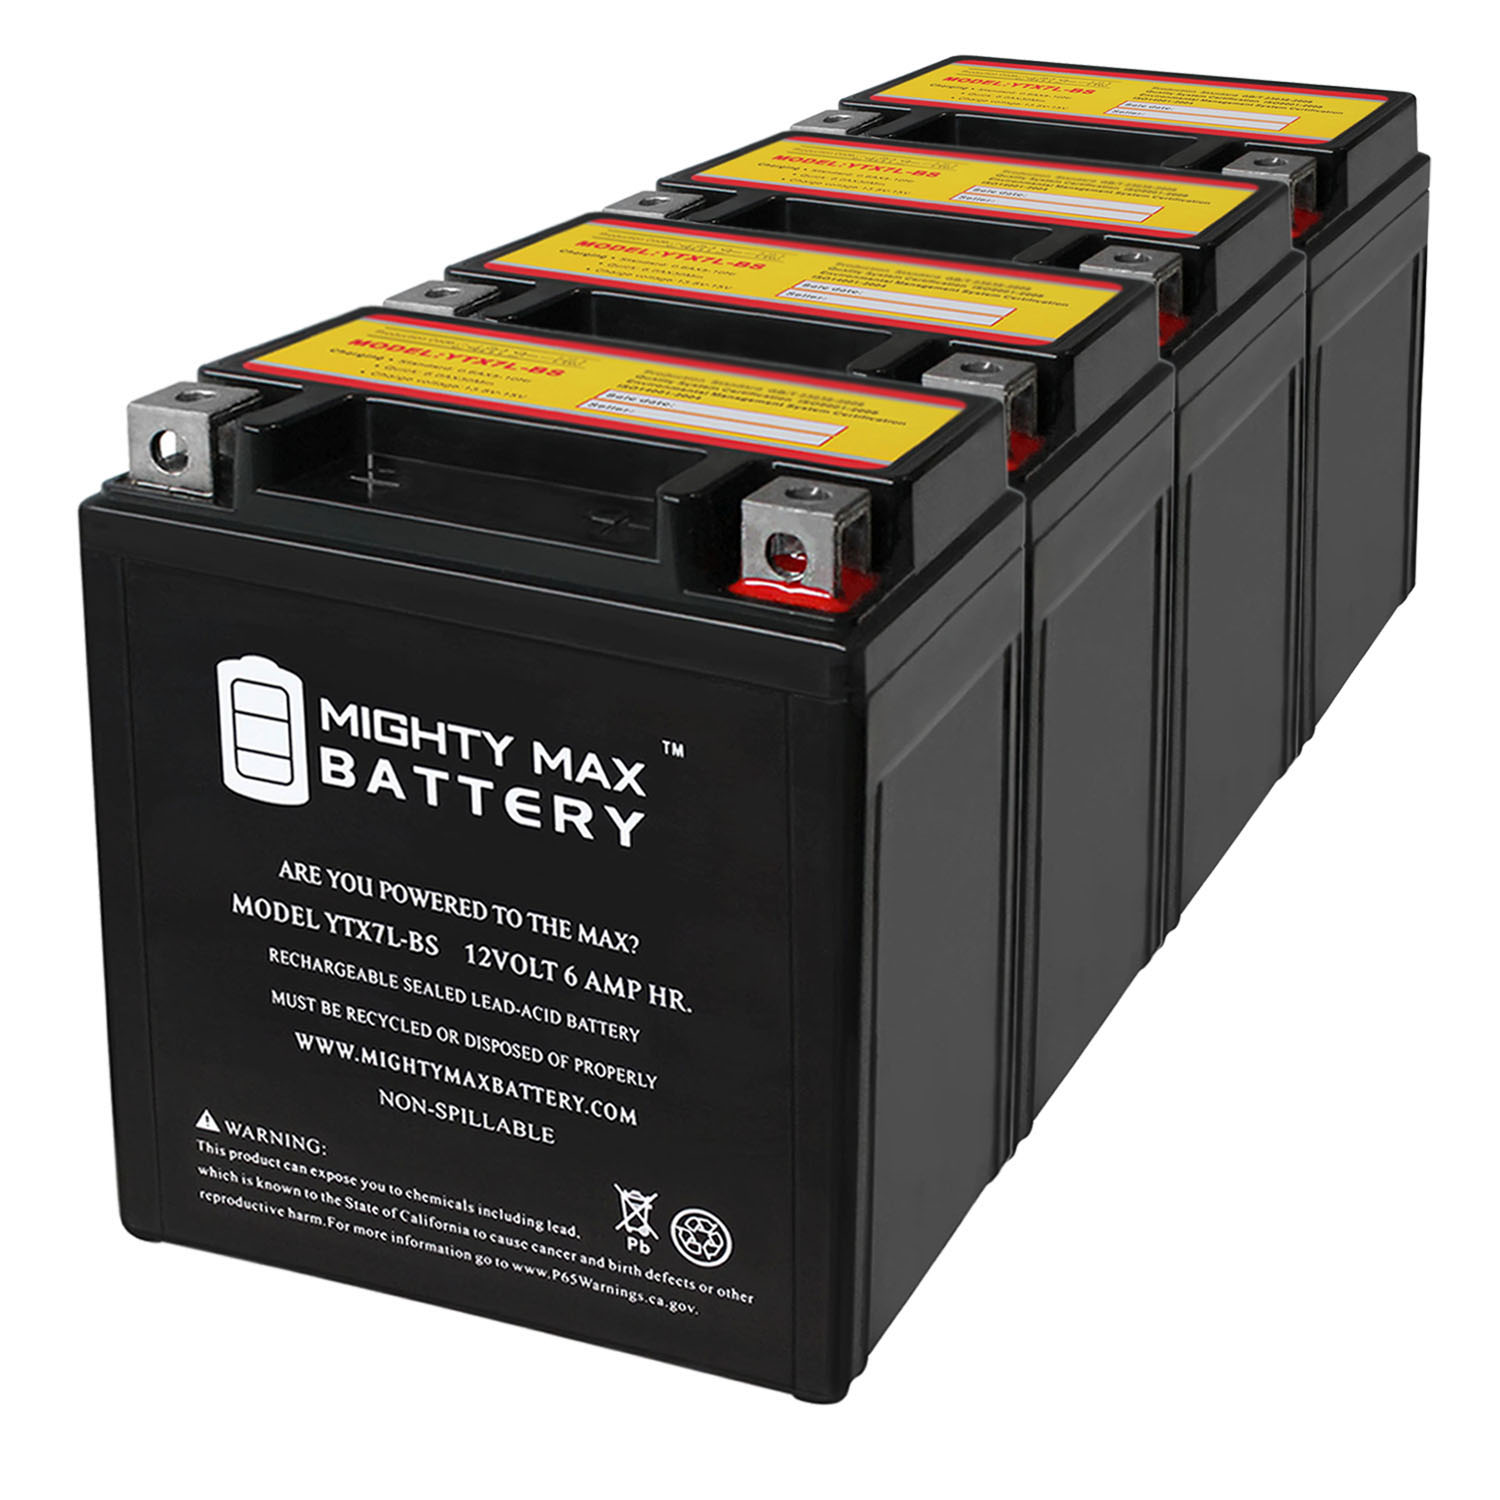 YTX7L-BS 12V 6Ah Battery Replacement for Derbi GPR 125 4T 09 - 4 Pack